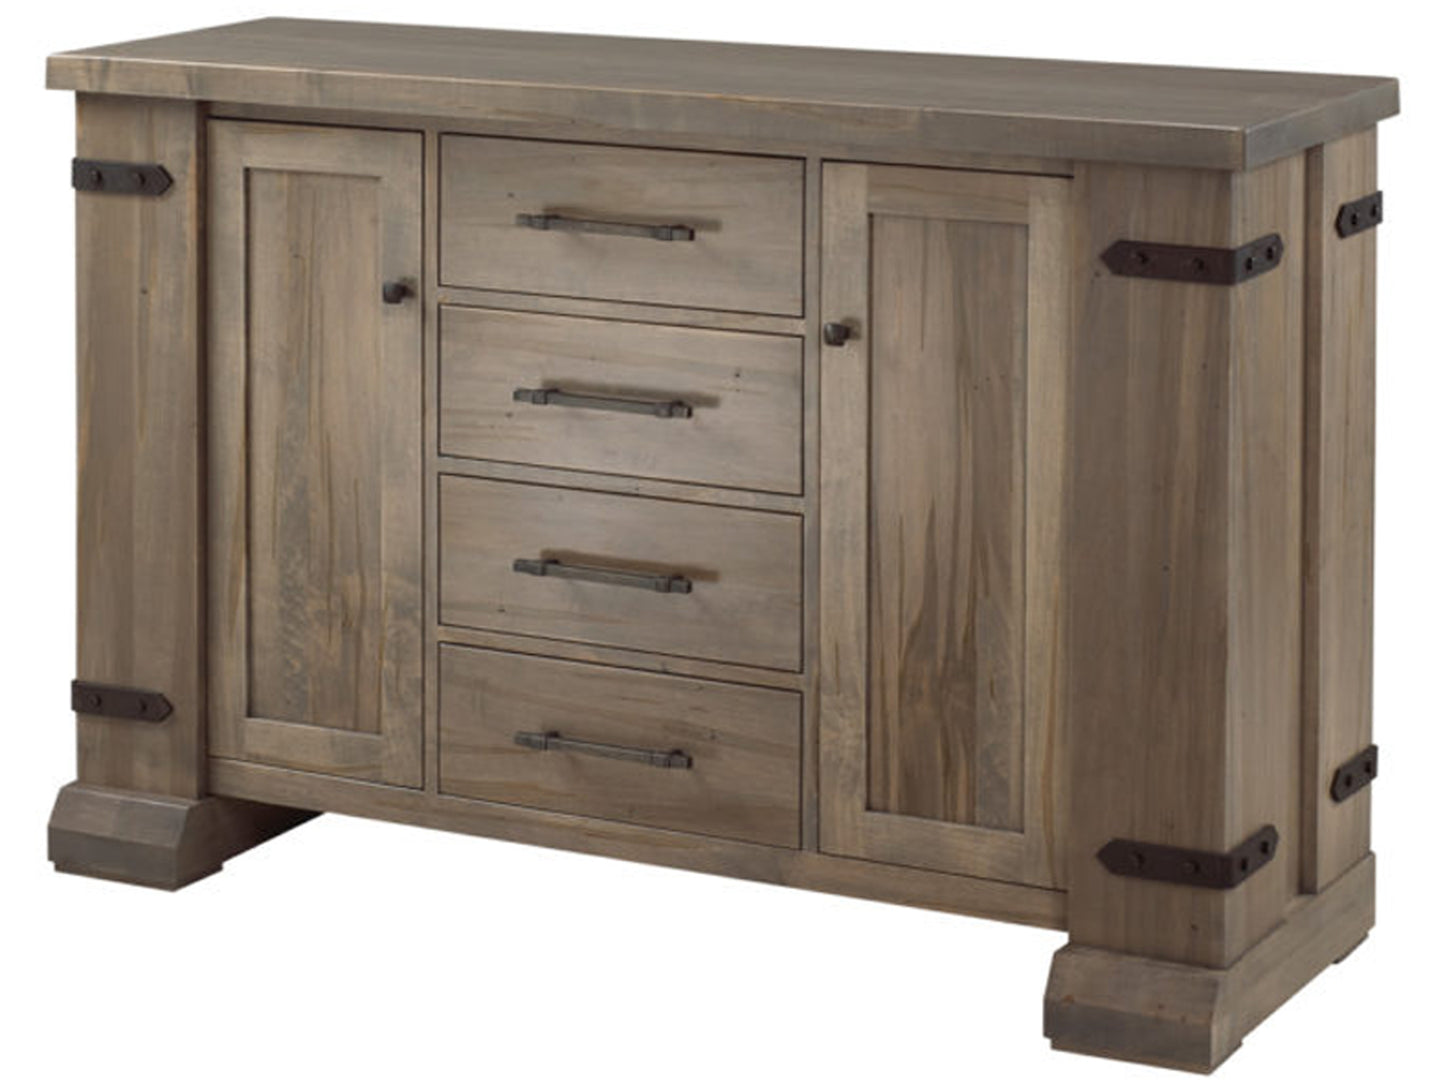 Acton Central server - solid wood, custom built furniture, Canadian made|